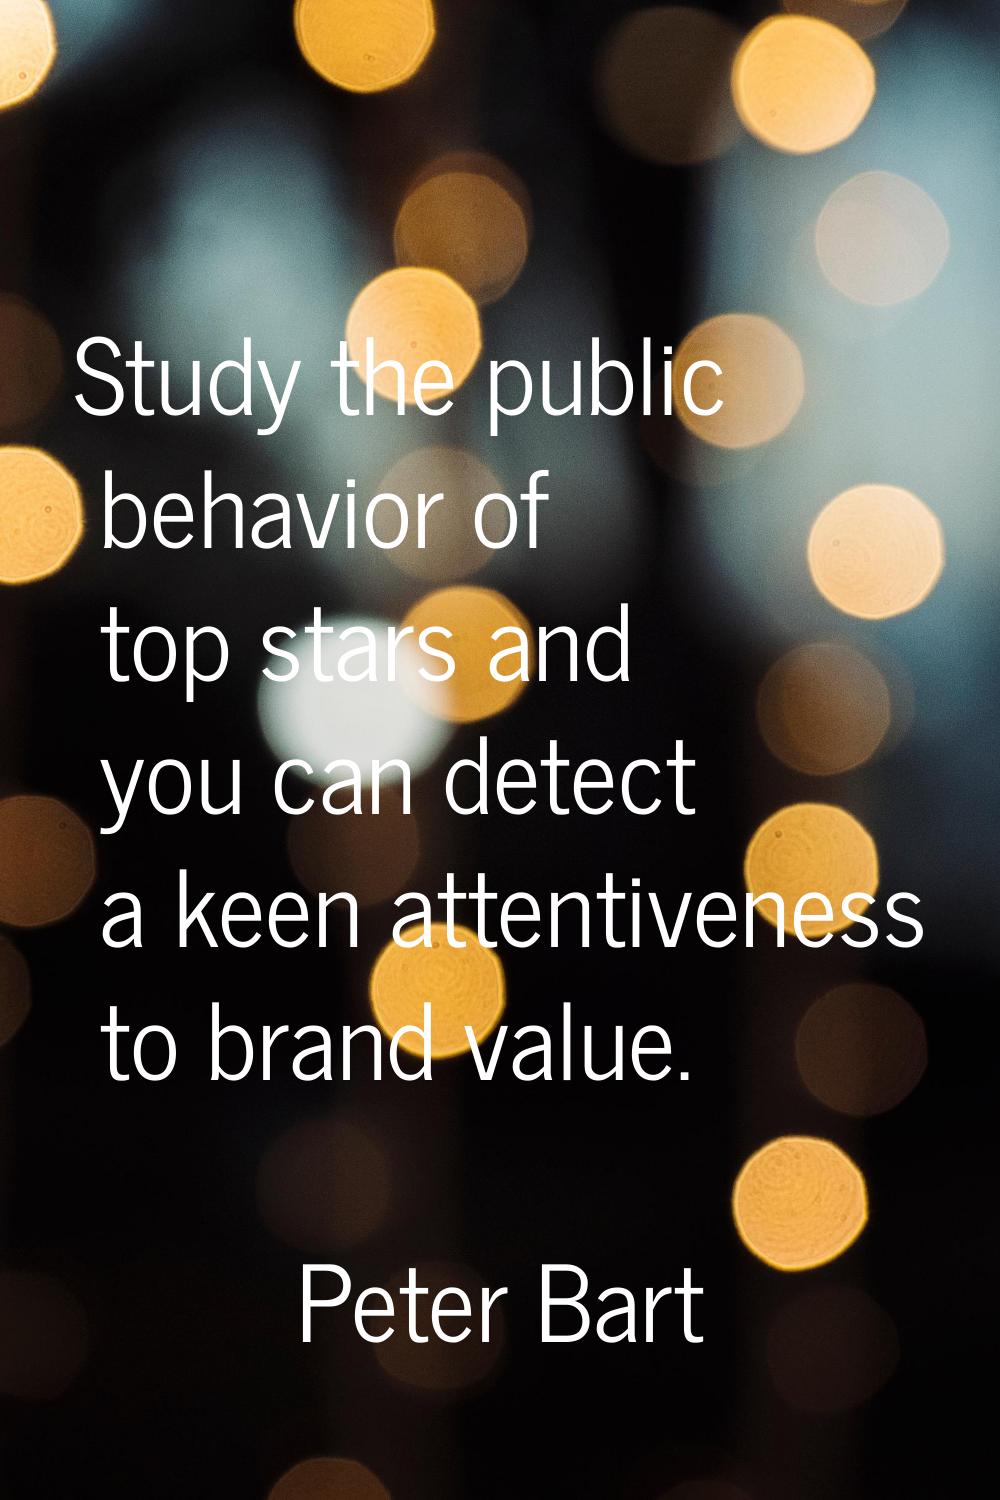 Study the public behavior of top stars and you can detect a keen attentiveness to brand value.